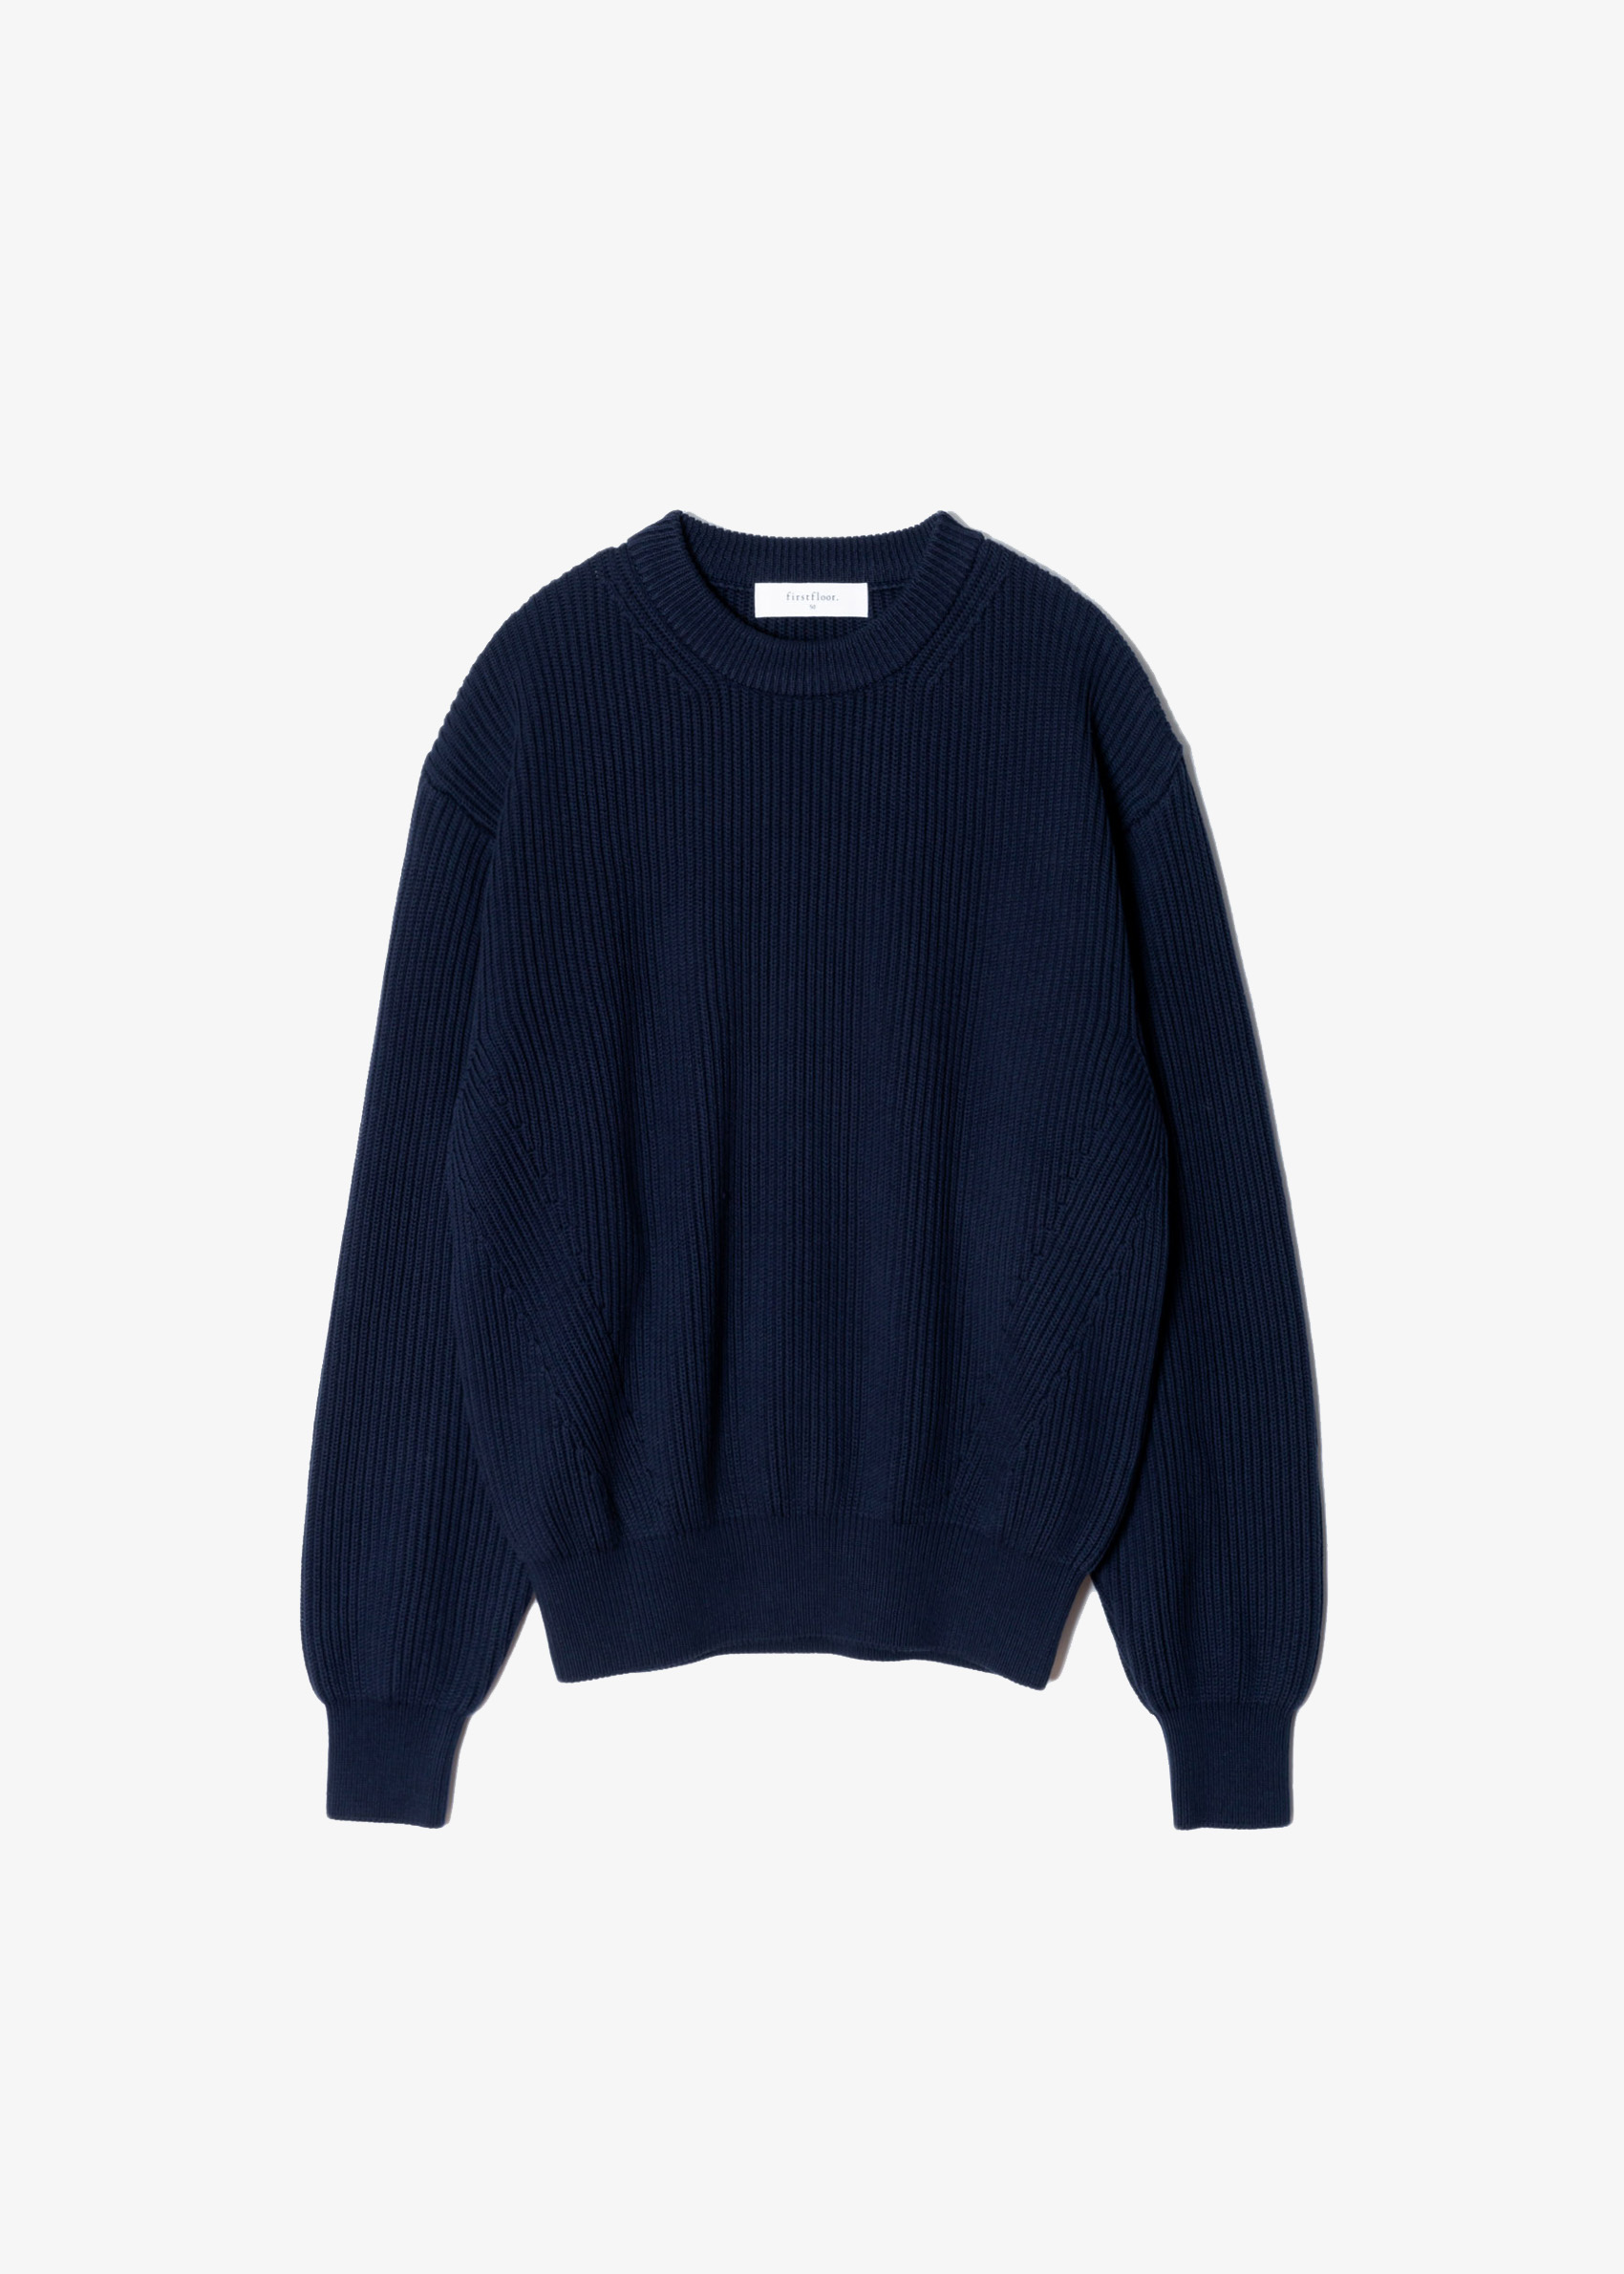 Daily cotton pullover (navy)